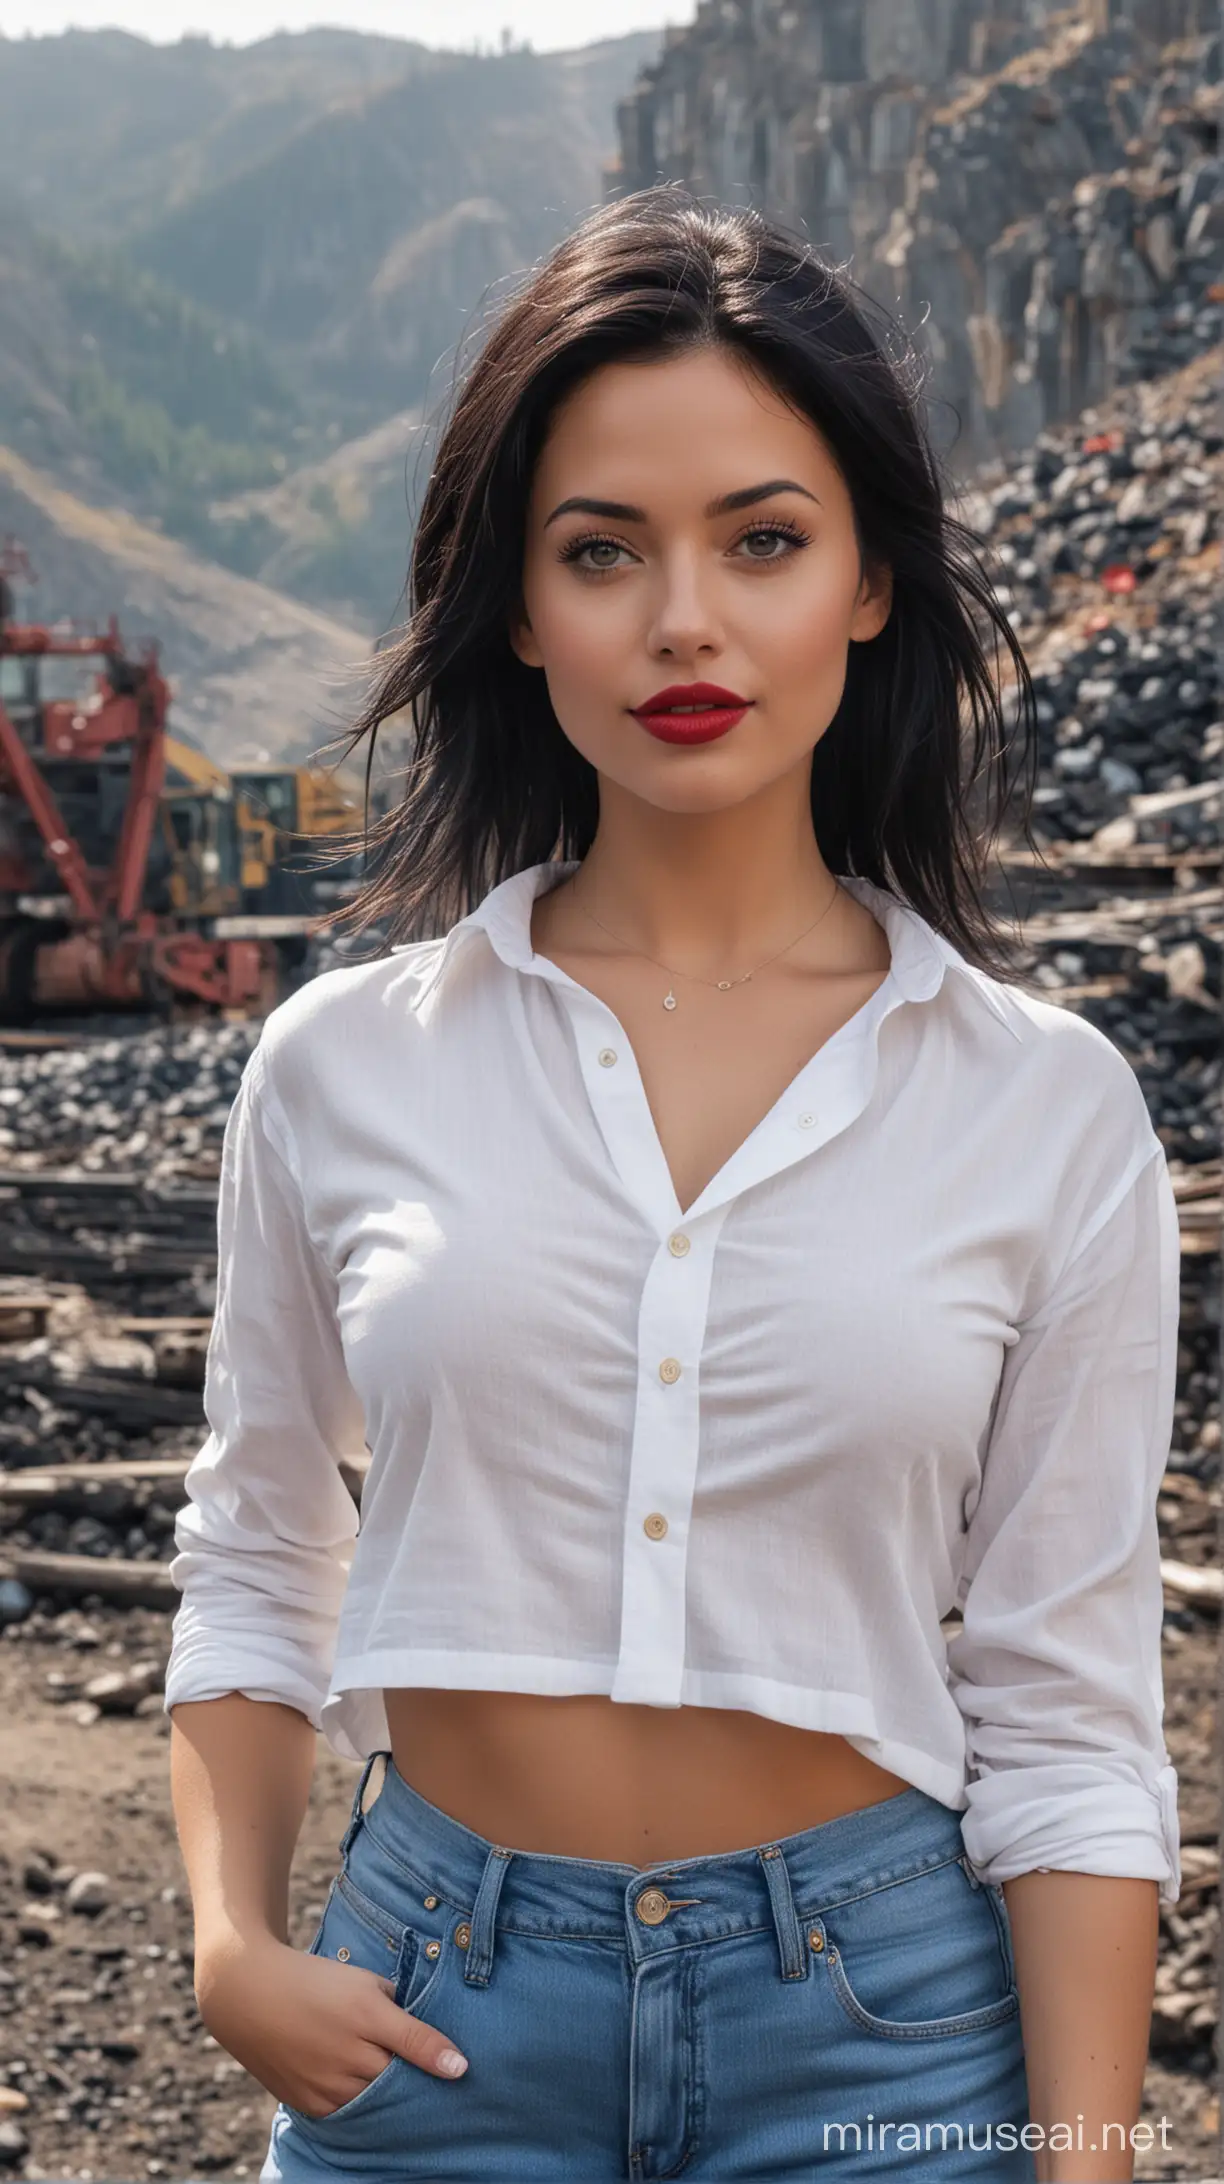 4k Ai art front view beautiful USA girl black hair red lipstick nose ring ear tops light blue jeans and white shirt and black bra in Alaska Crow Creek Mine